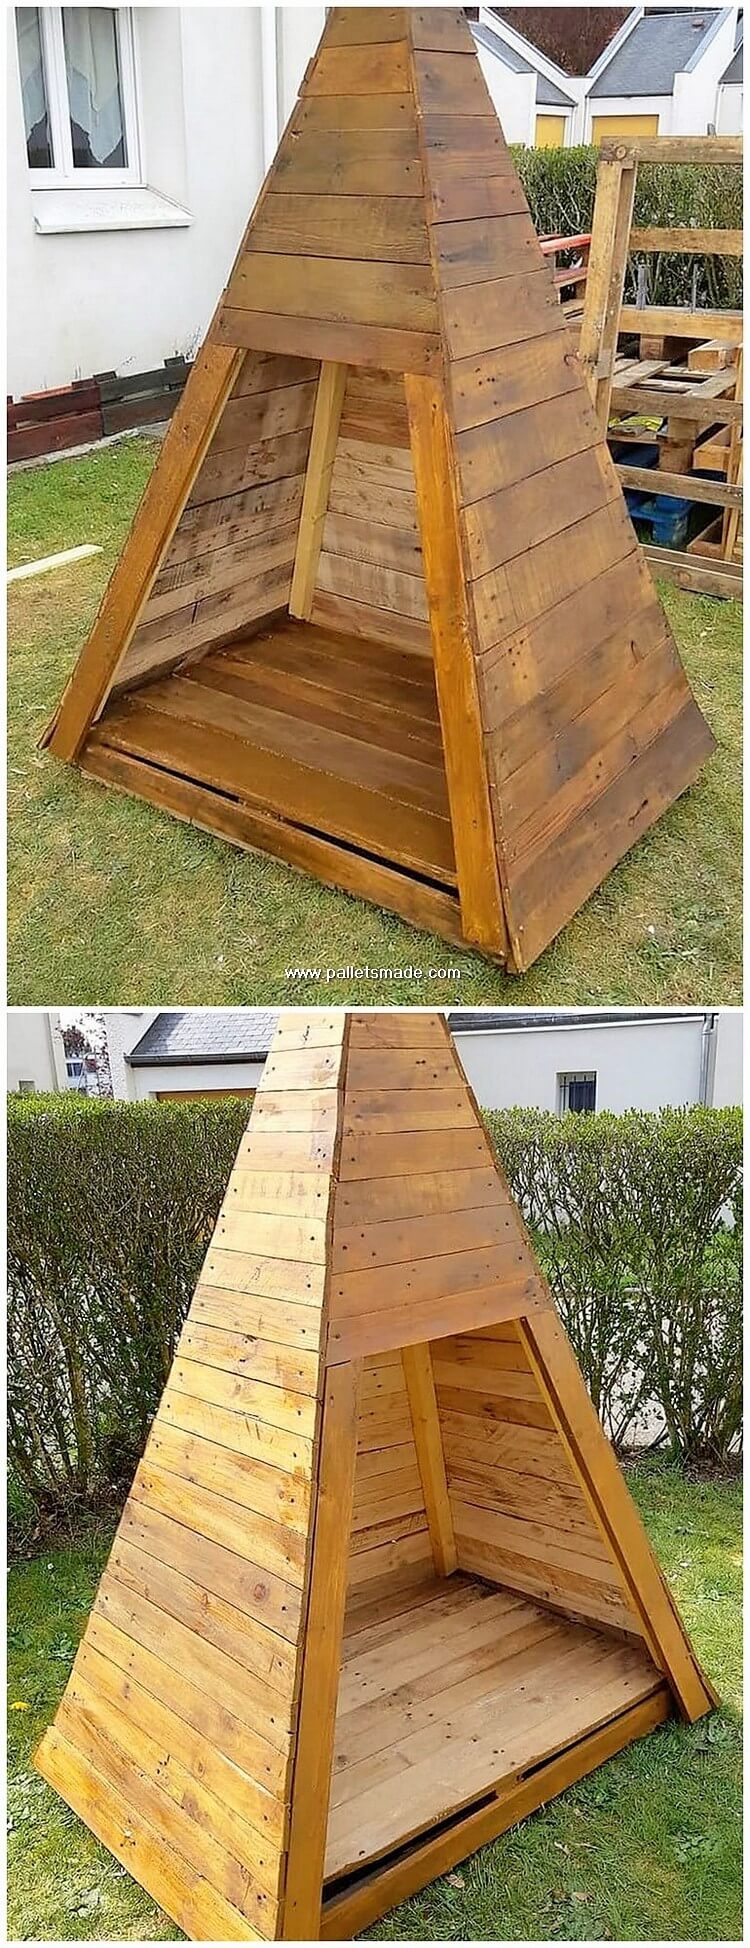 Pallet Teepee for Kids